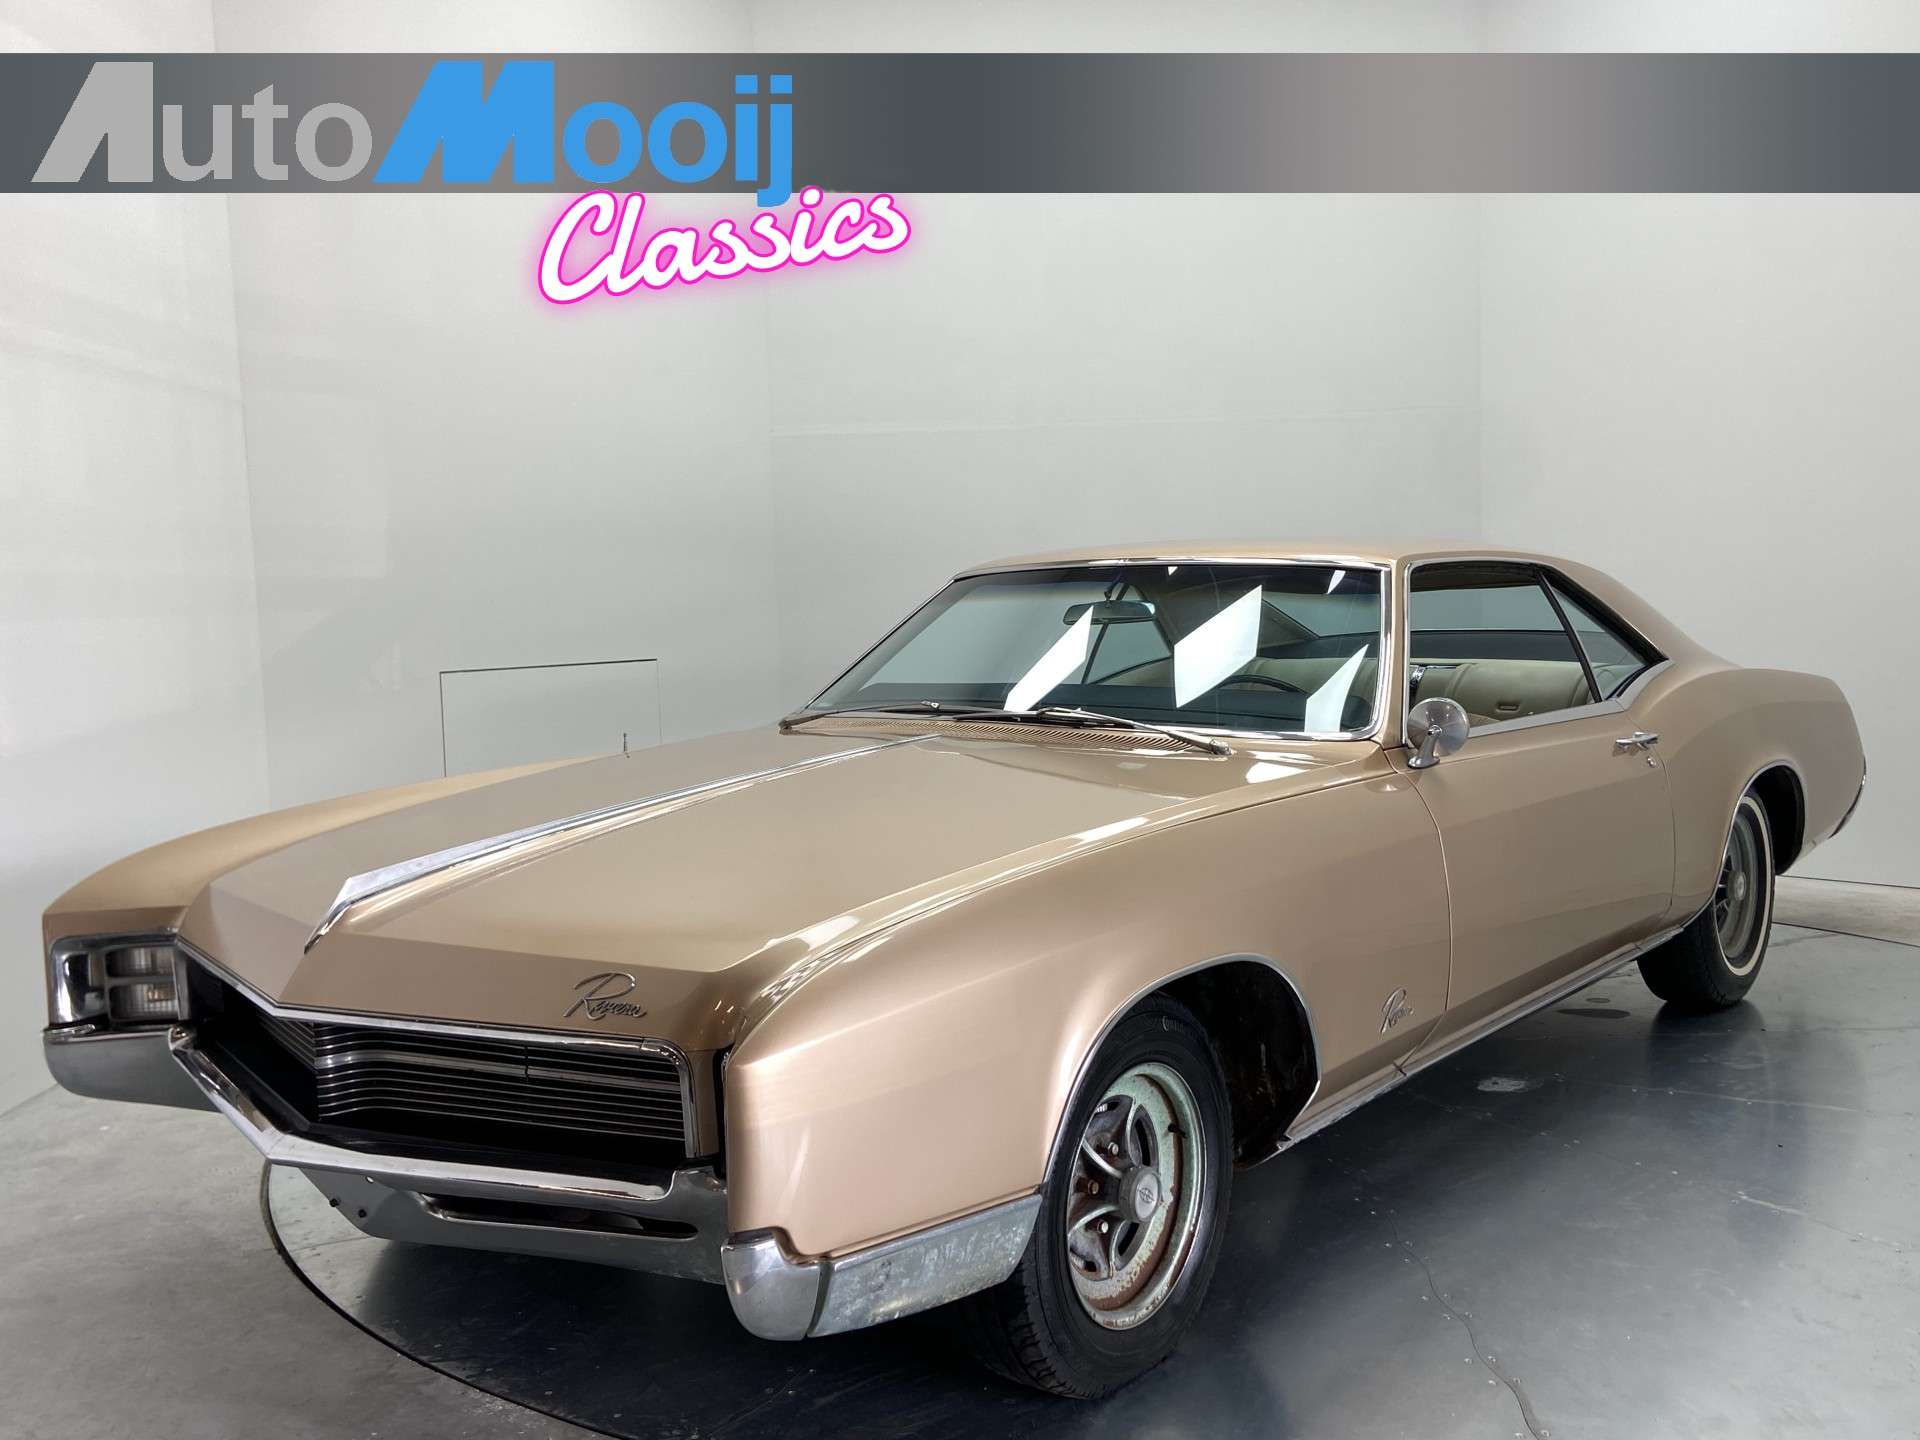 Buick Riviera Coupe in Gold antique / classic in BEEK EN DONK for € 19,950.-